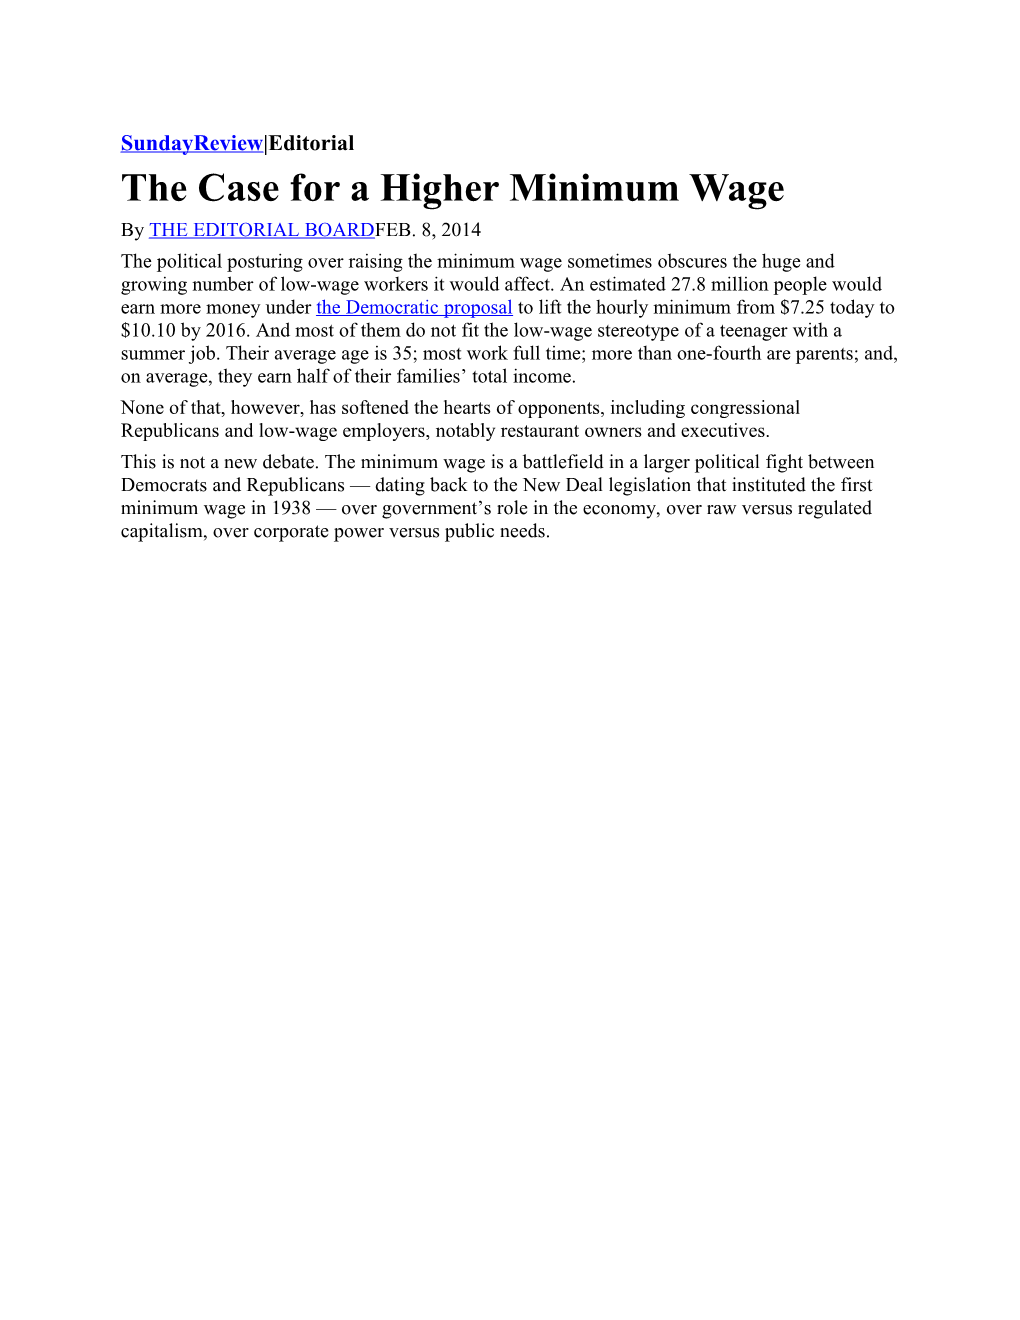 The Case for a Higher Minimum Wage